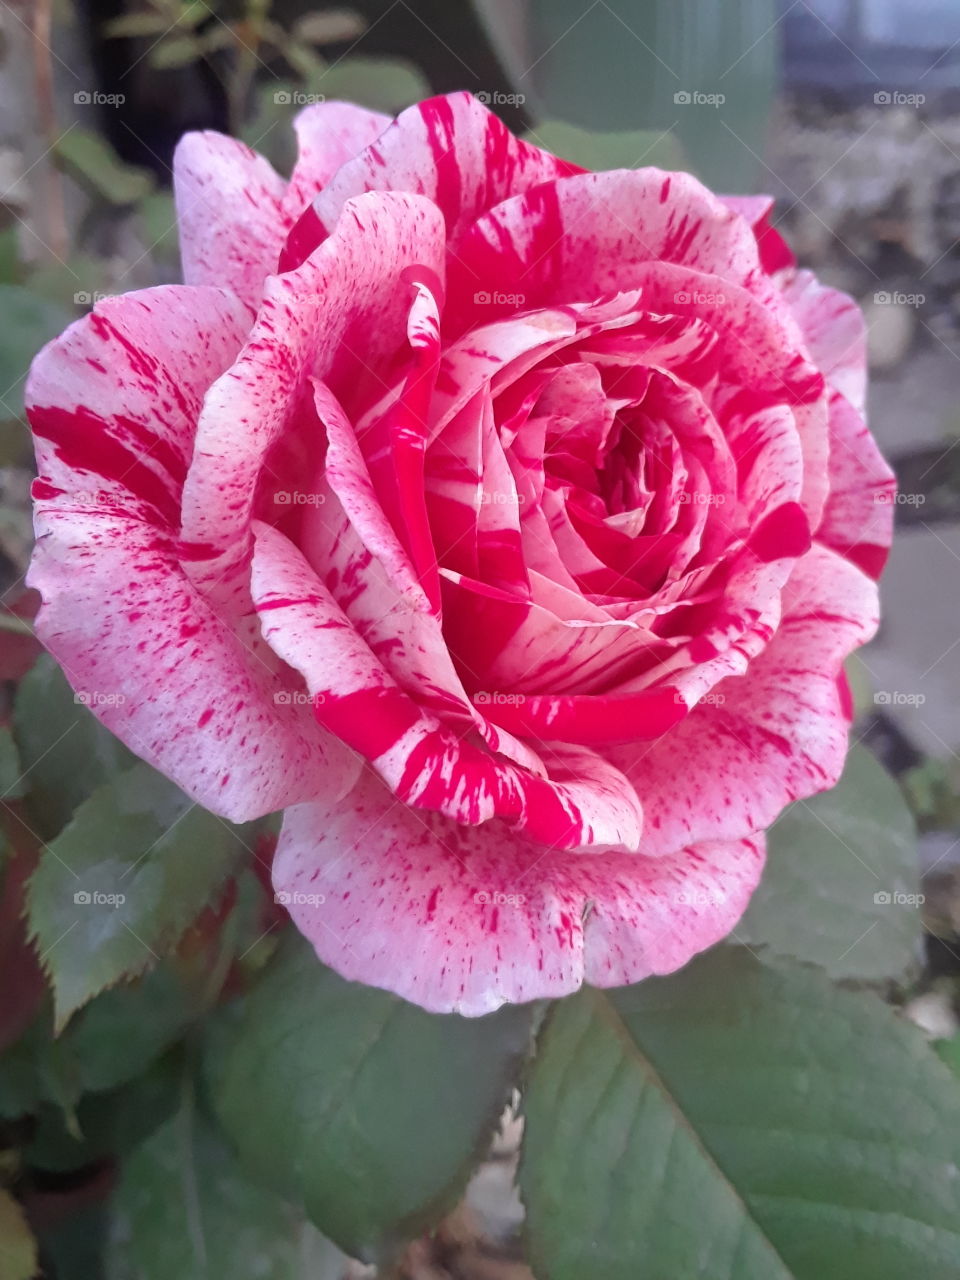 Sent a licous Red and pink variegated rose